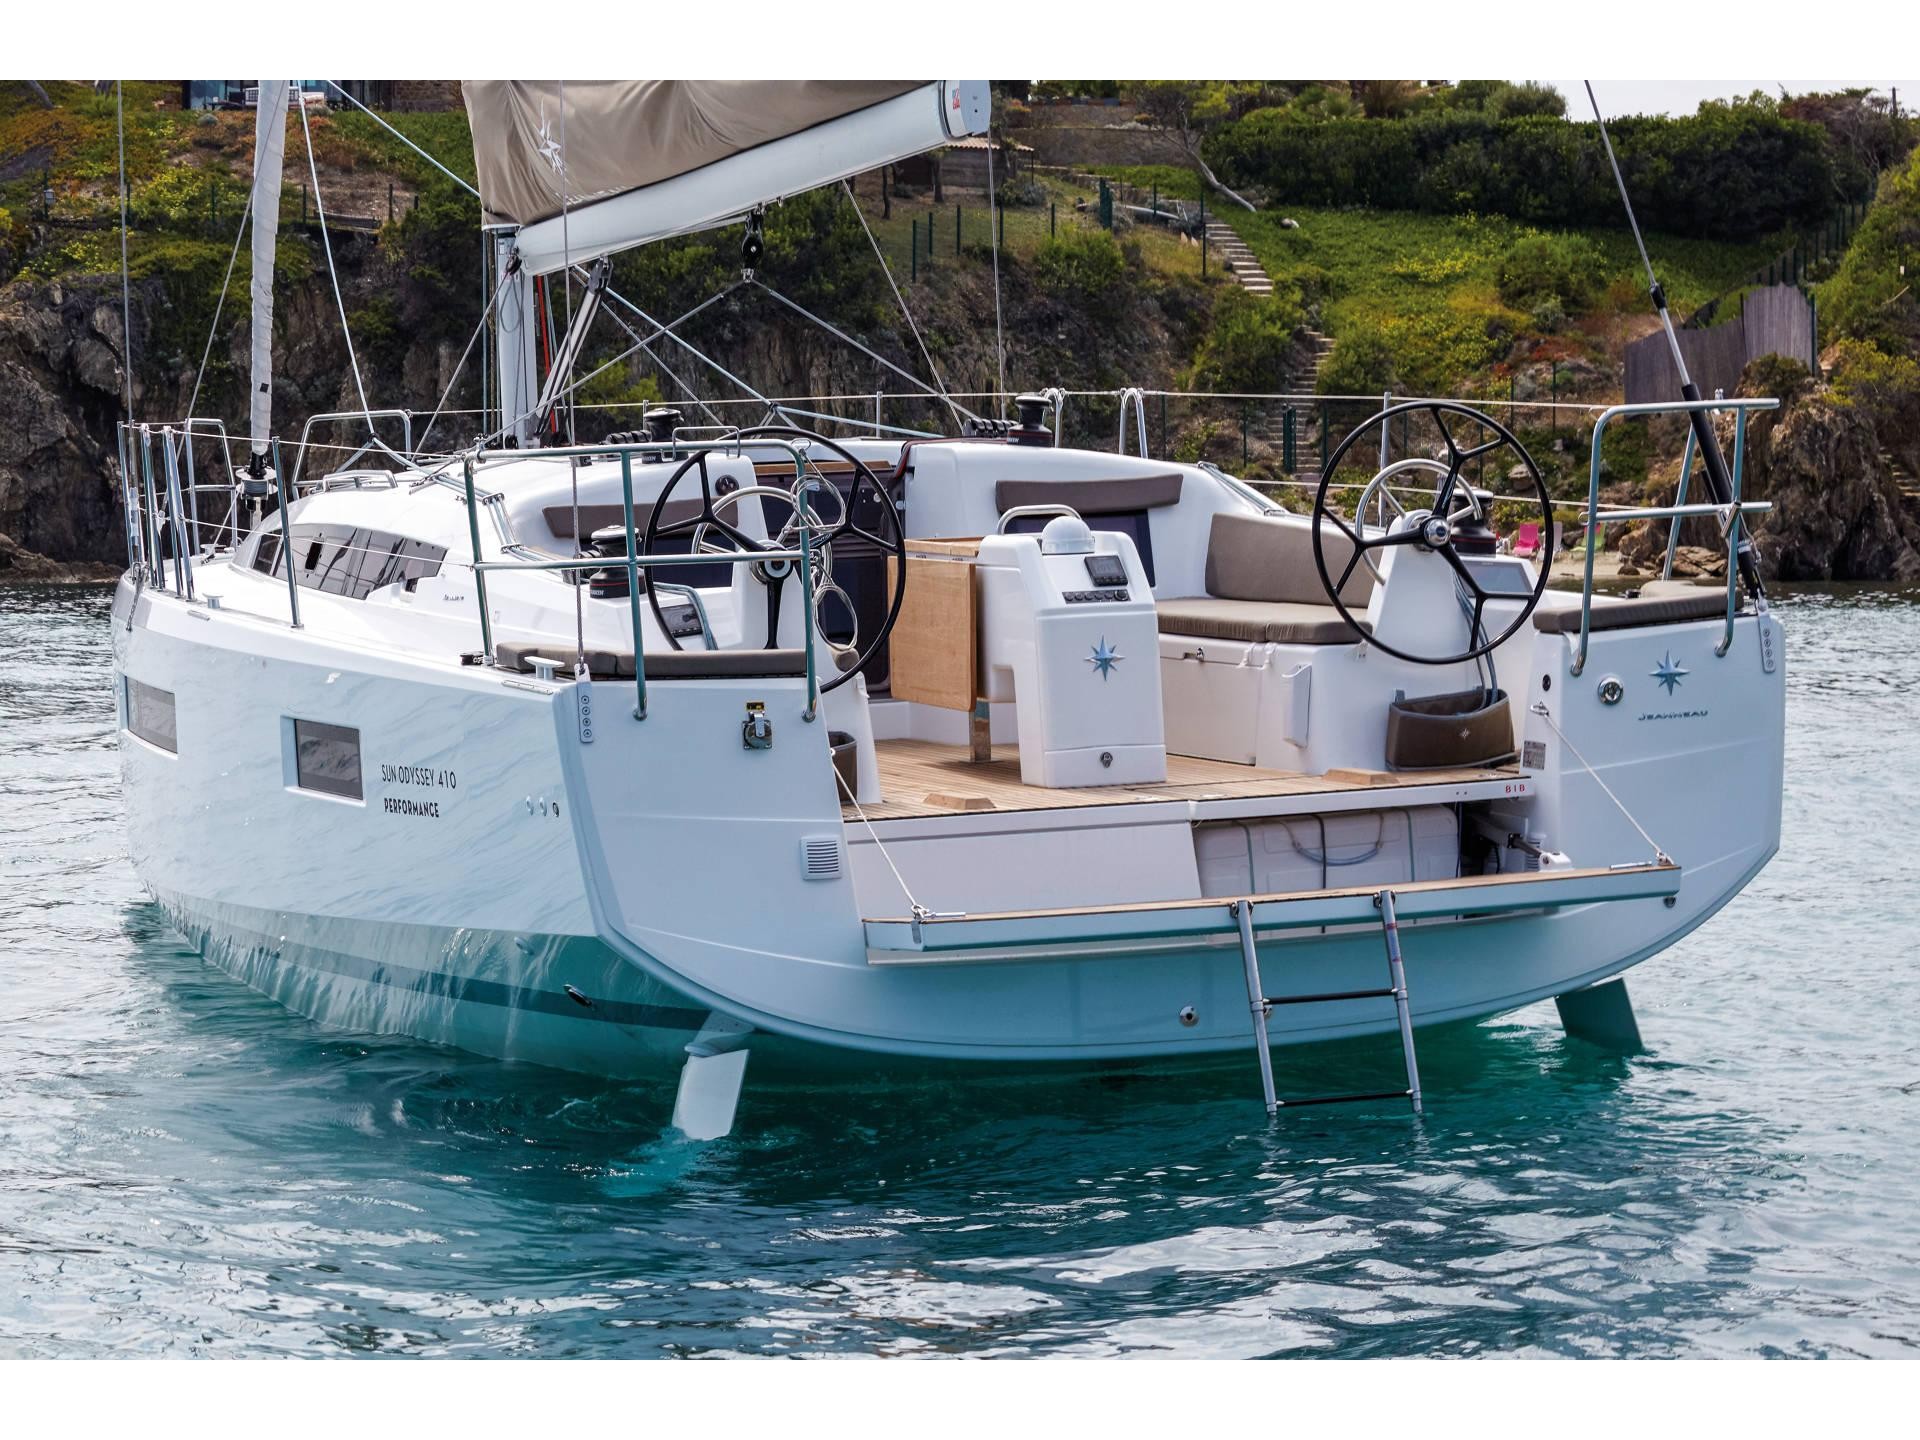 Sun Odyssey 410 - Yacht Charter Cyclades & Boat hire in Greece Cyclades Islands Paros Naoussa Naousa Marina 1